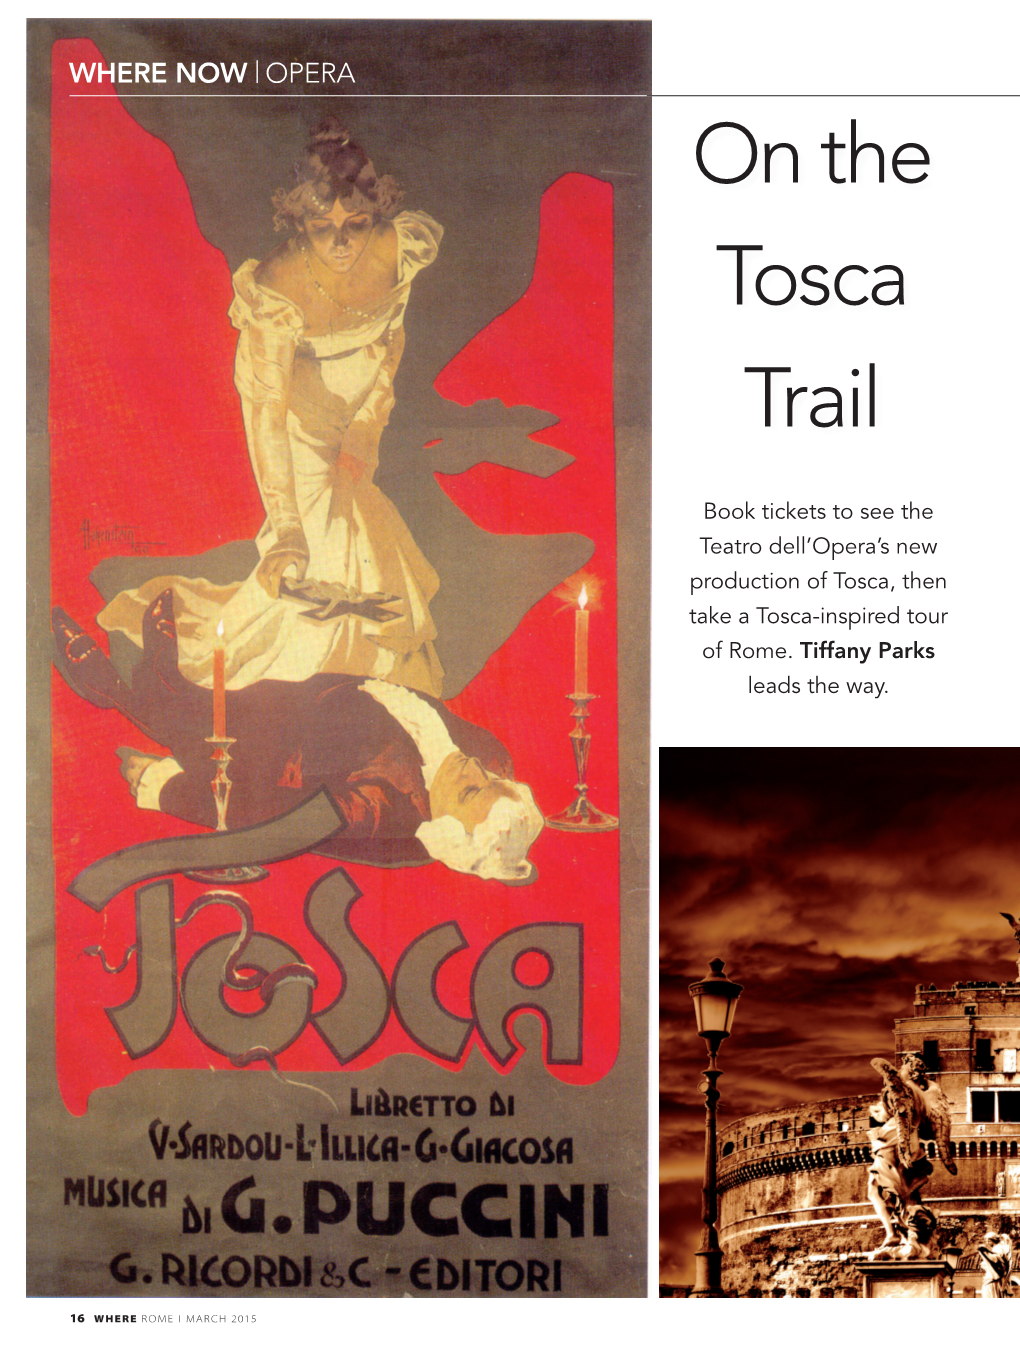 On the Tosca Trail